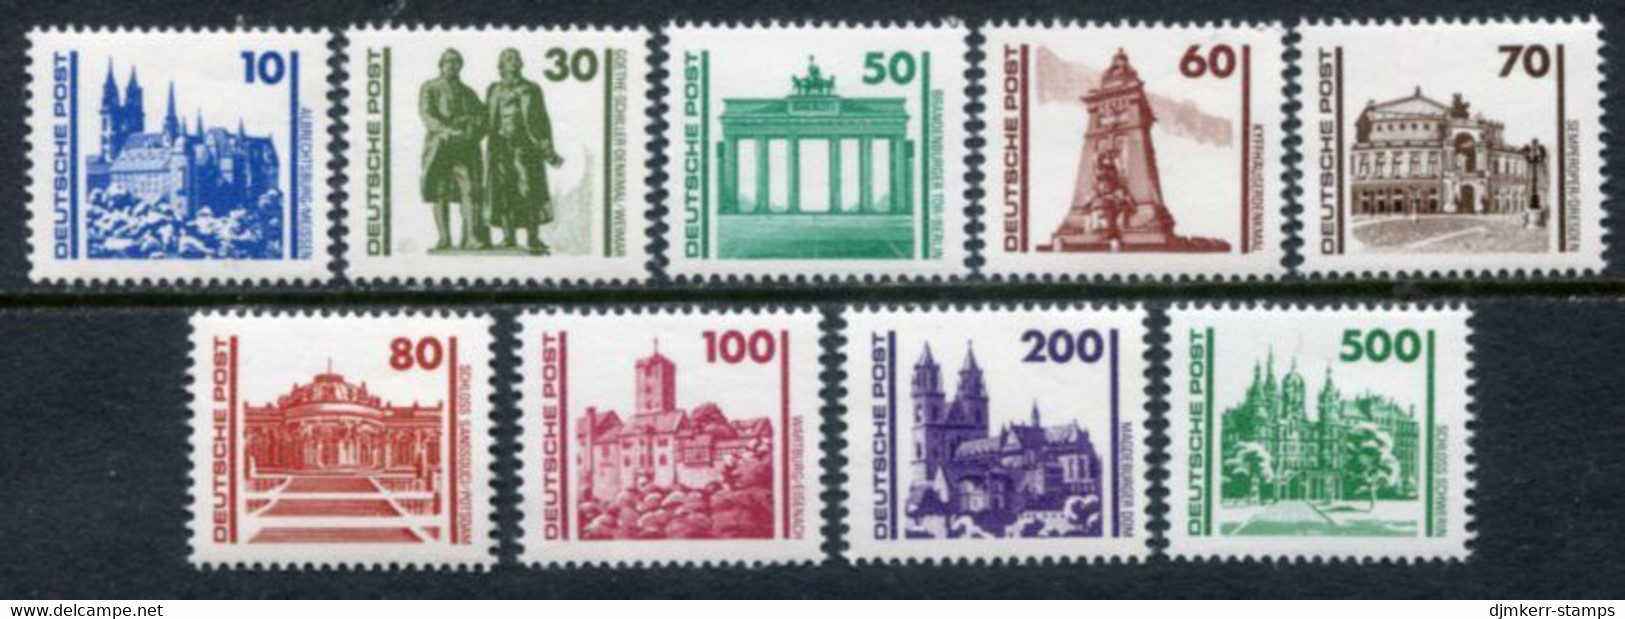 DDR 1990 Buildings And Monuments Definitive MNH / **  Michel 3344-52 - Ungebraucht